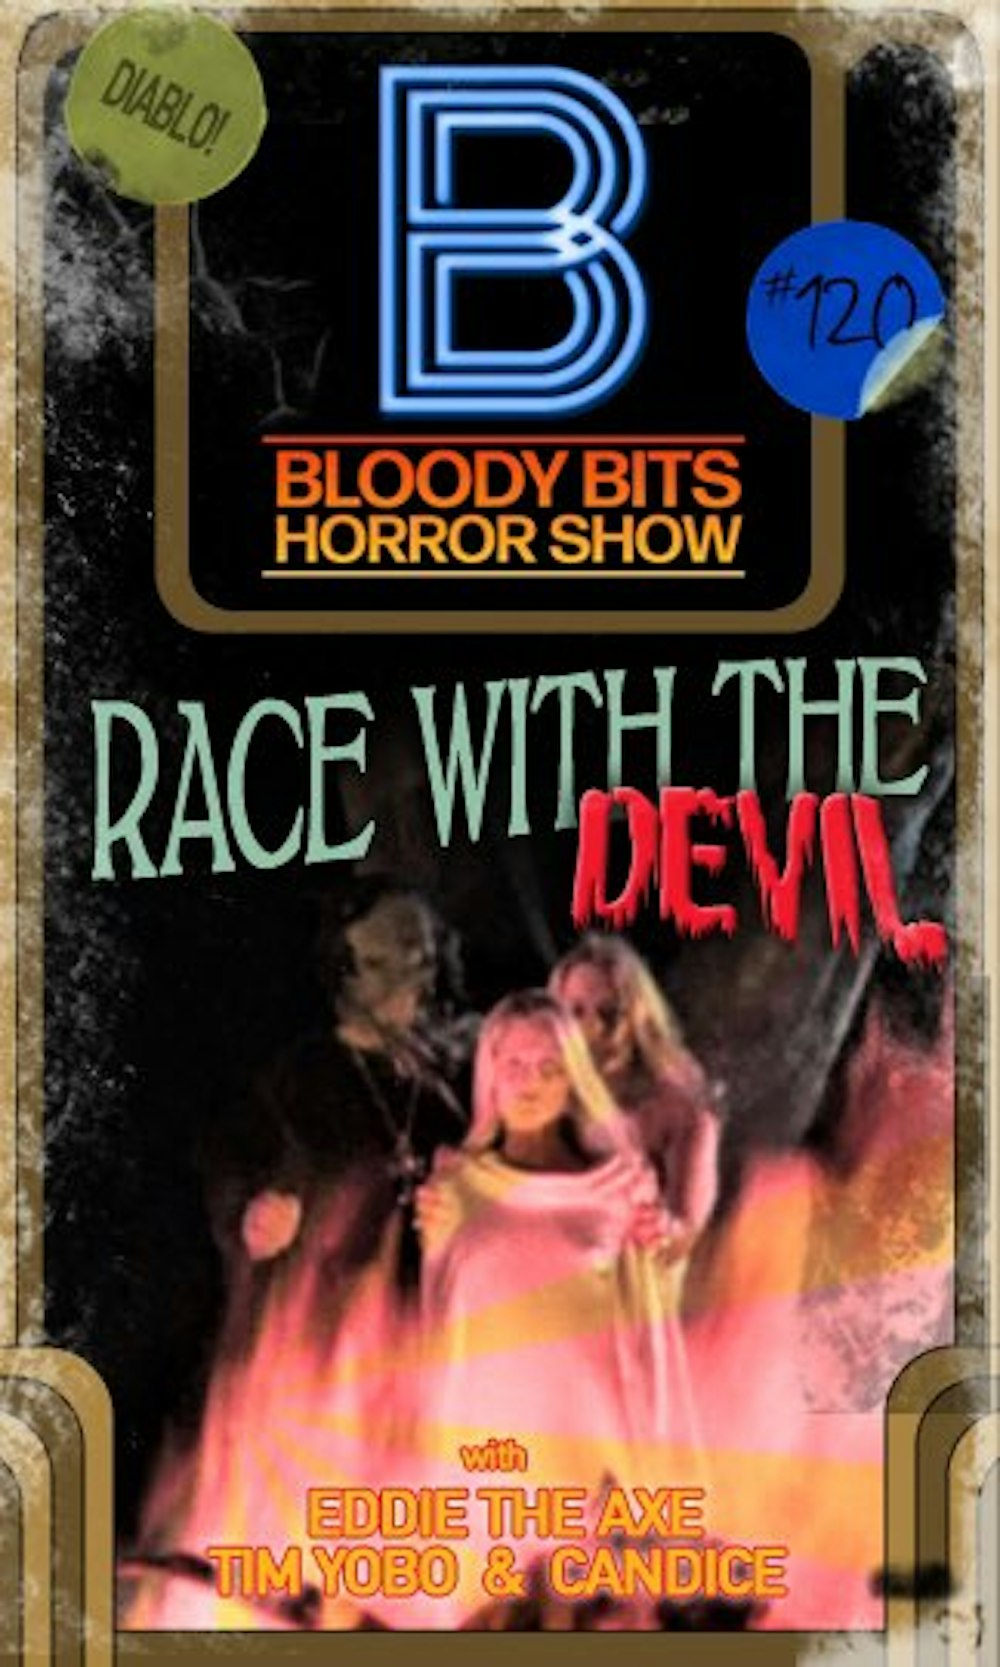 EP120 - Race With The Devil